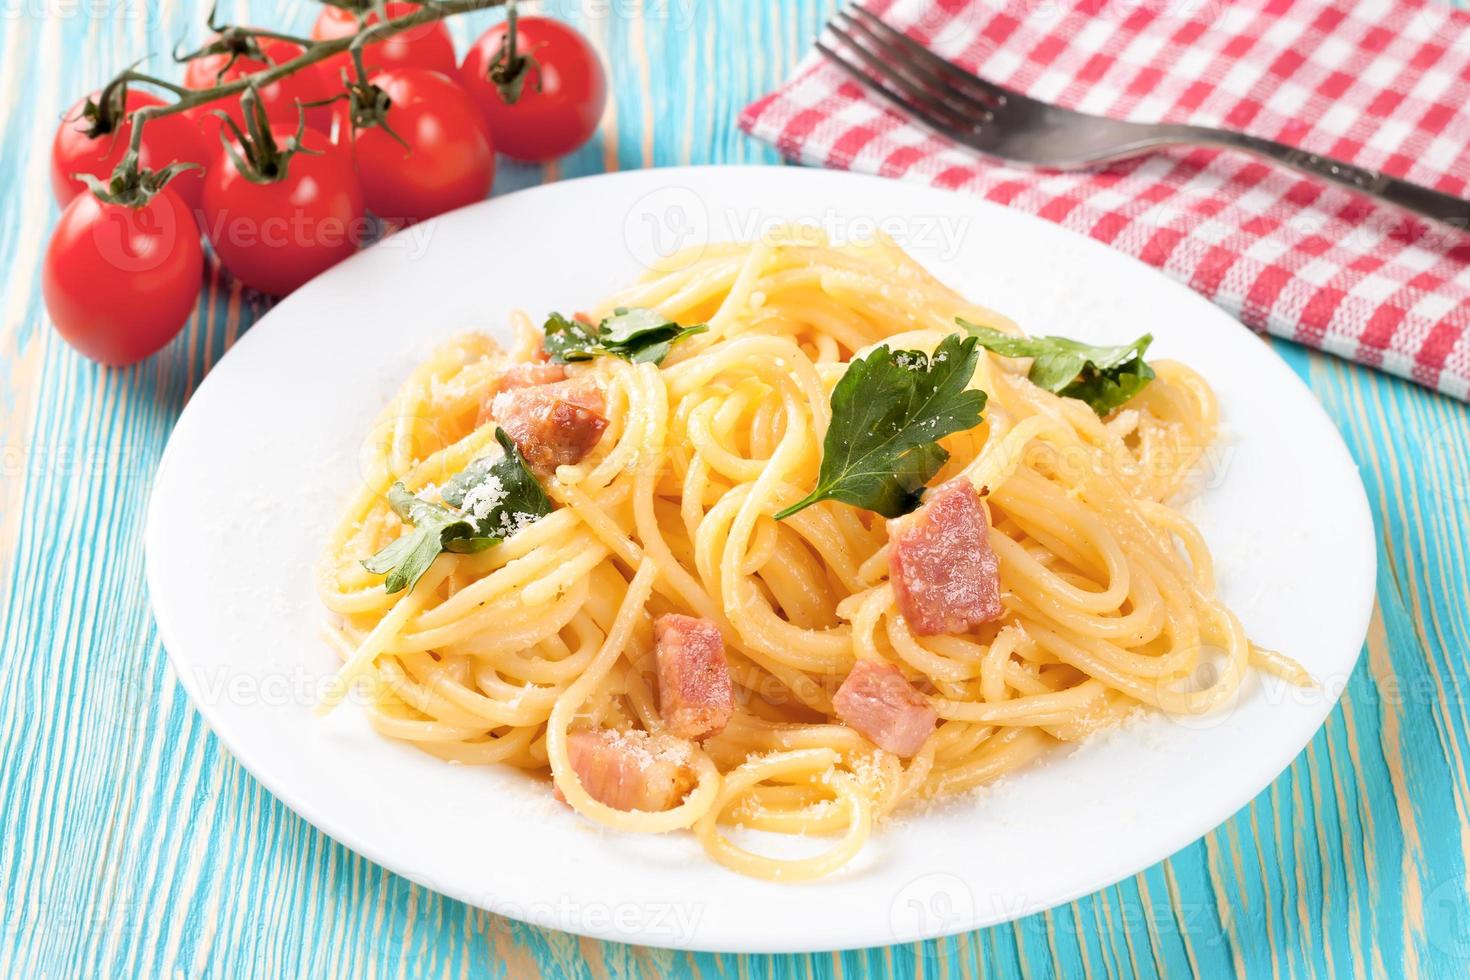 Pasta Carbonara served on a white plate. photo